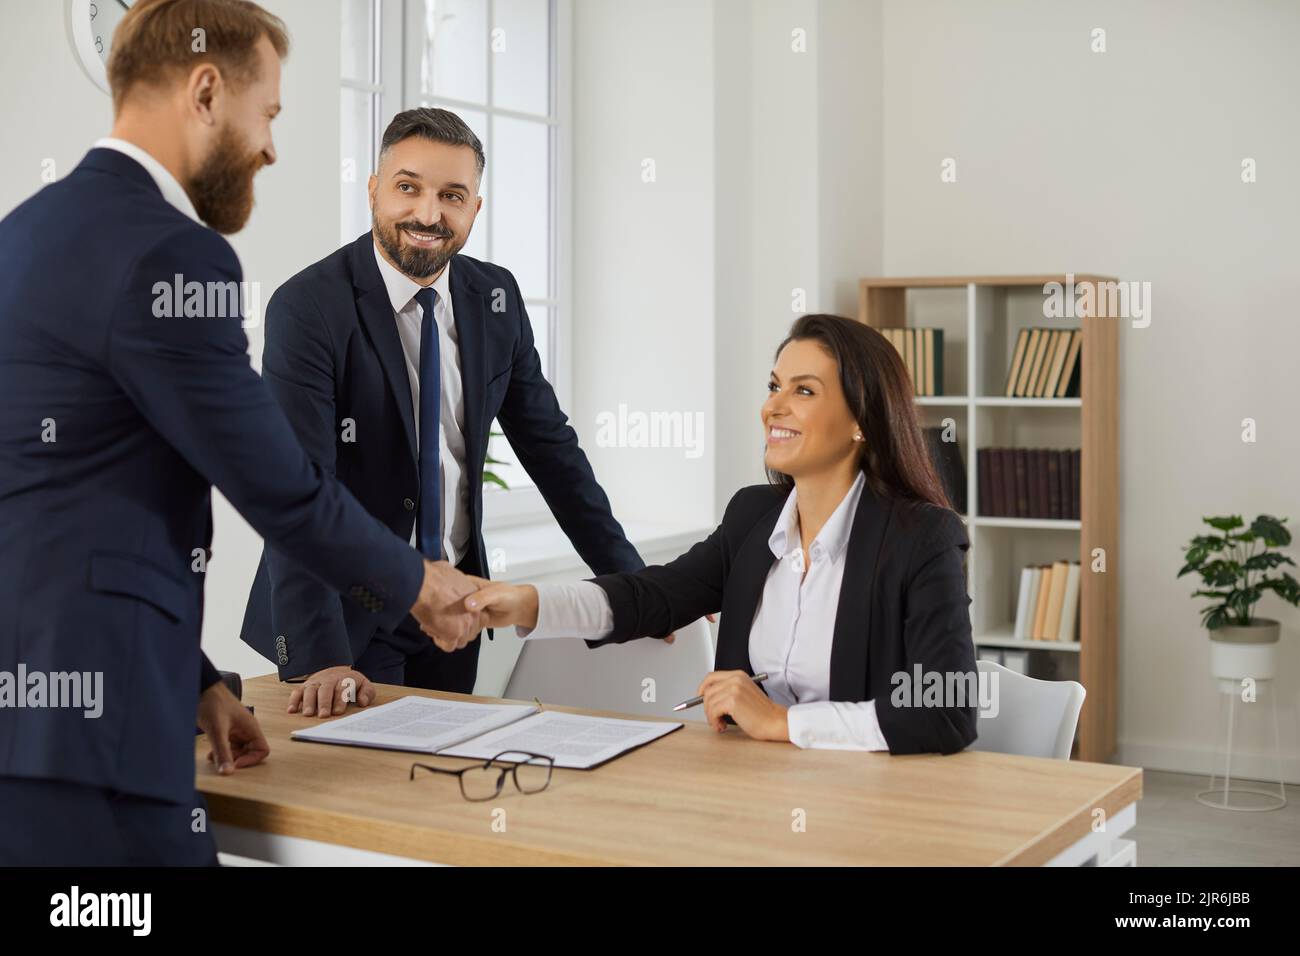 Smiling diverse businesspeople handshake get acquainted Stock Photo